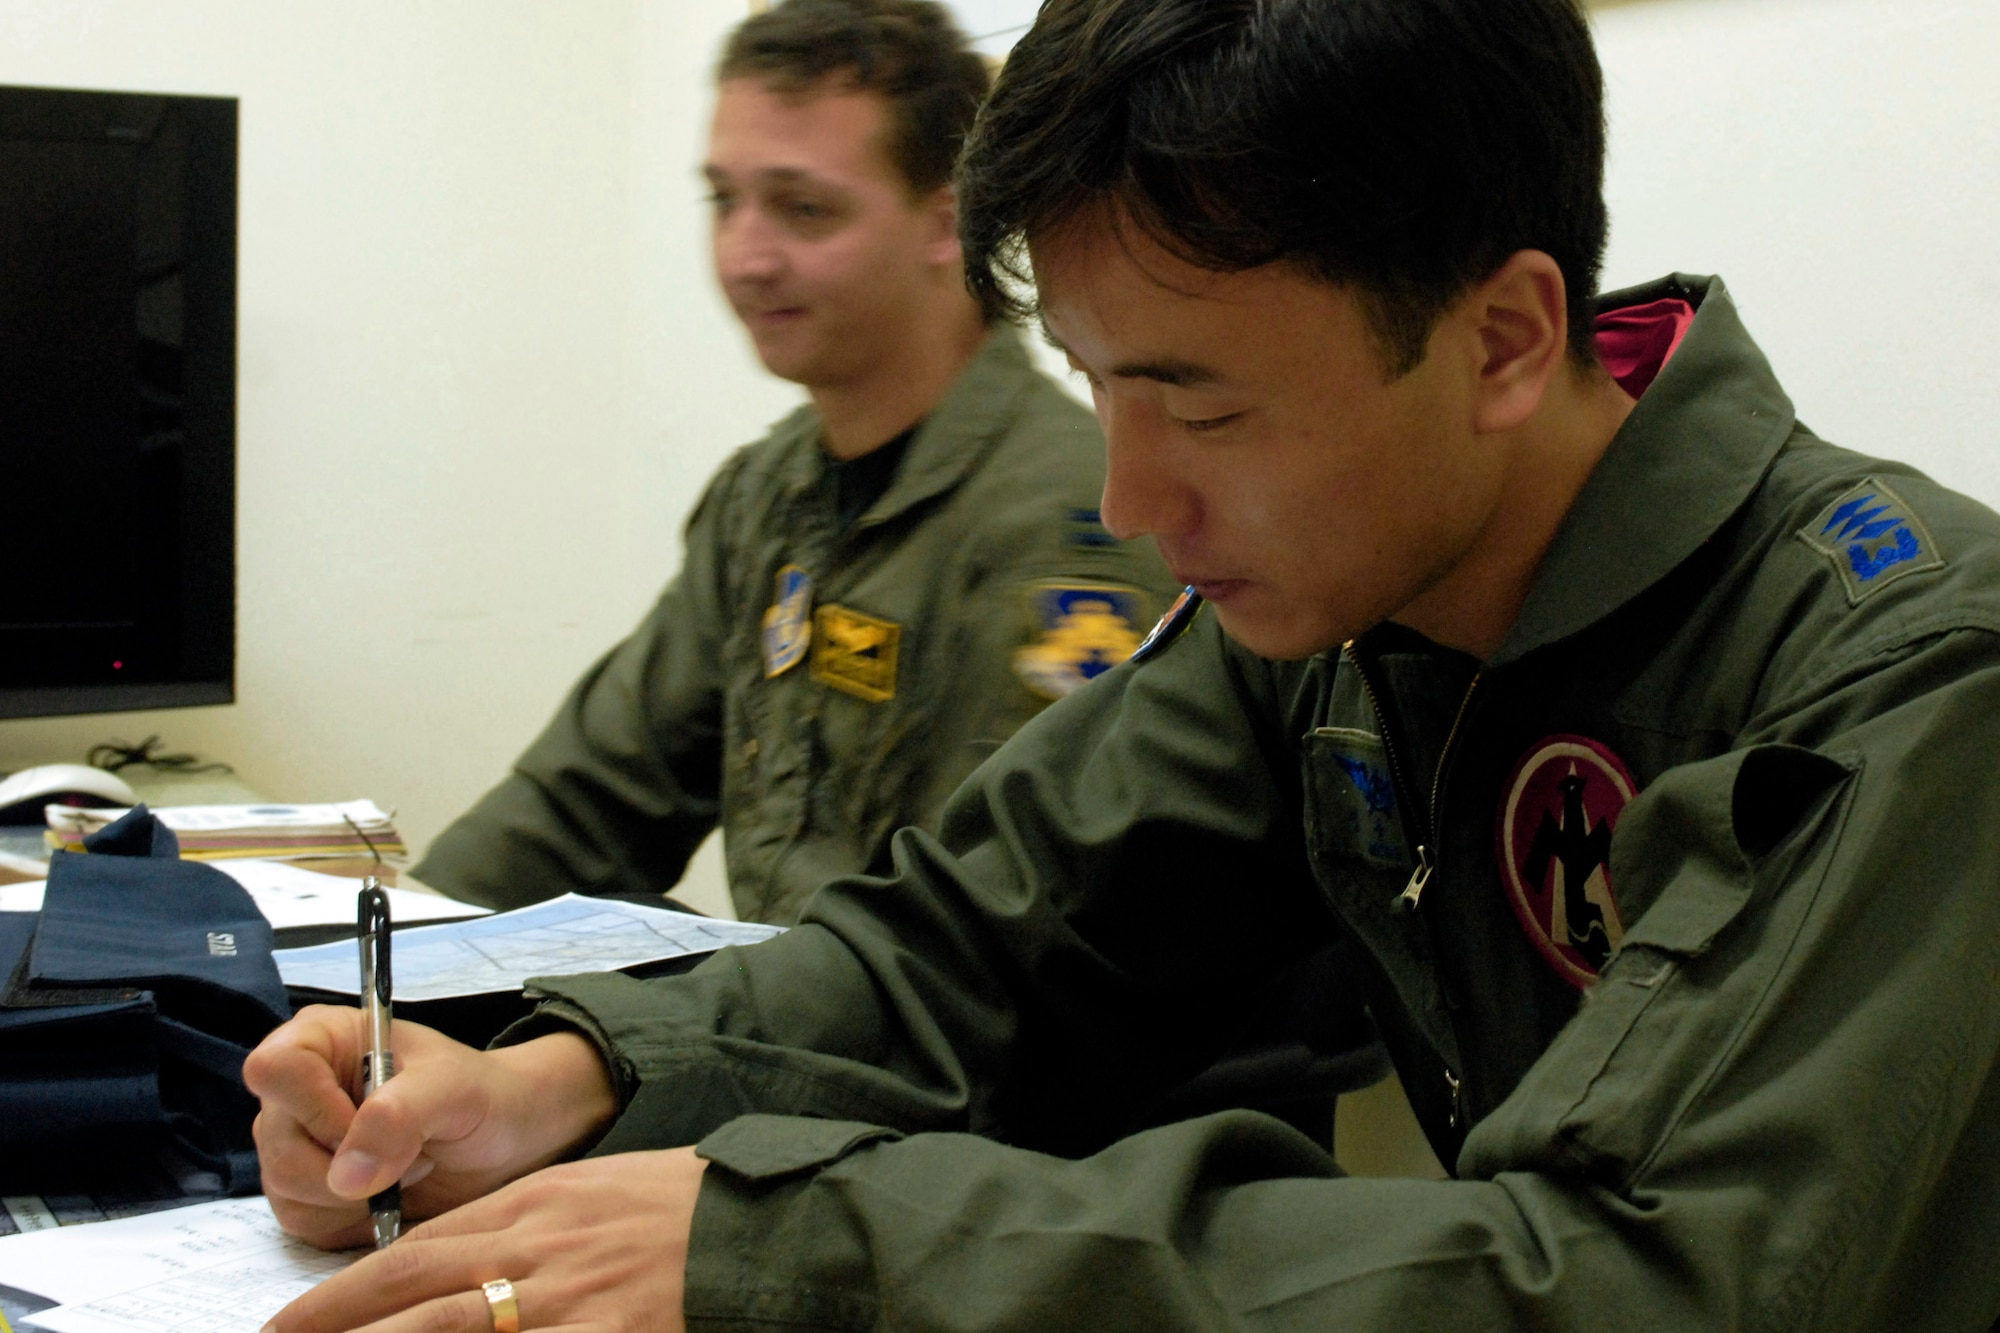 South Korea air force Capt. Sang-su Jung (foreground) takes notes as U.S. Air Force Capt. Michael McCarthy gives a pre-flight brief during the Buddy Wing program at Jungwon Air Base Oct. 24. Captain Jung is a pilot assigned to the 161st Fighter Squadron and Capt. McCarthy is a pilot assigned to the 80th Fighter Squadron, Kunsan Air Base, South Korea. The Buddy Wing program is a way for U.S. Air Force and South Korea air force to develop teamwork, exchange ideas and improve war time tactics. (U.S. Air Force photo/Senior Airman Steven R. Doty) 
